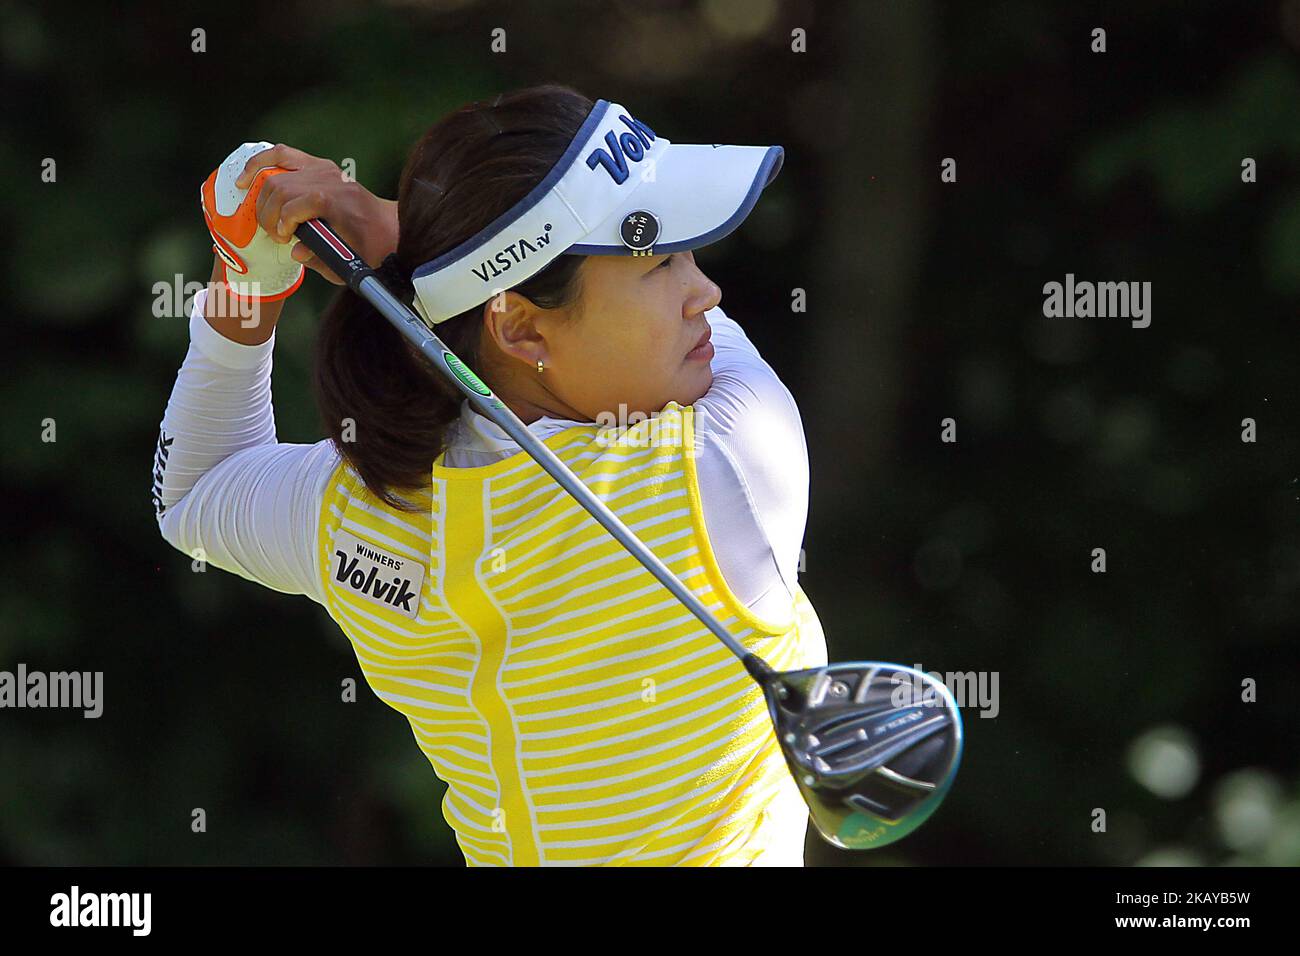 Ilhee Lee of Seoul, Republic of Korea, during the first round of the Meijer LPGA Classic golf tournament at Blythefield Country Club in Belmont, MI, USA Thursday, June 14, 2018. (Photo by Amy Lemus/NurPhoto) Stock Photo